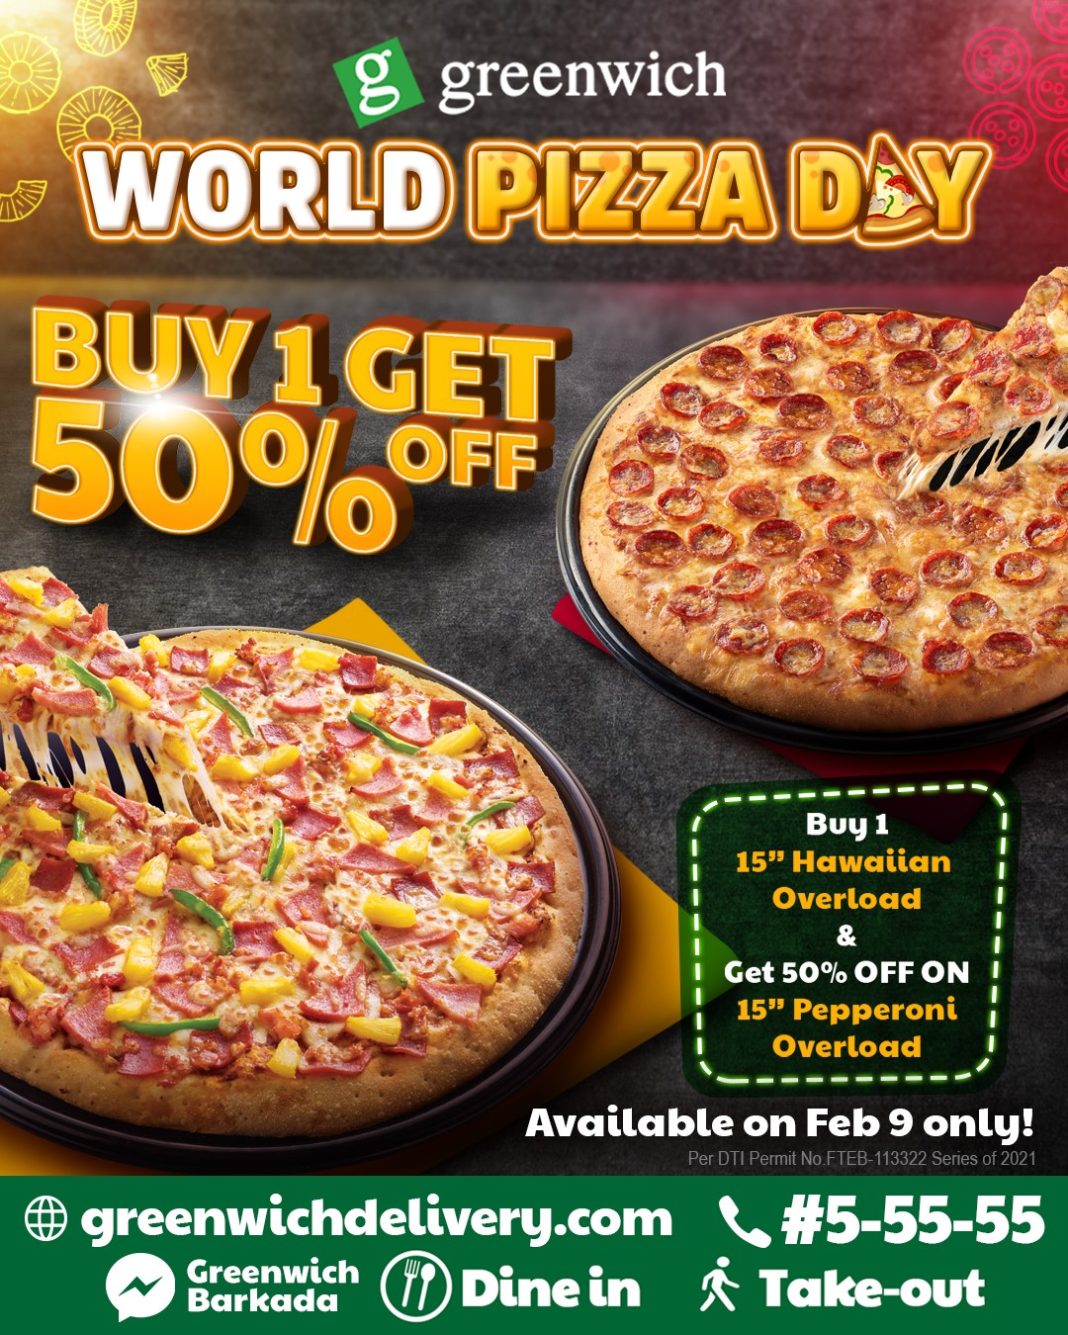 Greenwich World Pizza Day Promo 2021 Poster 1068x1335 